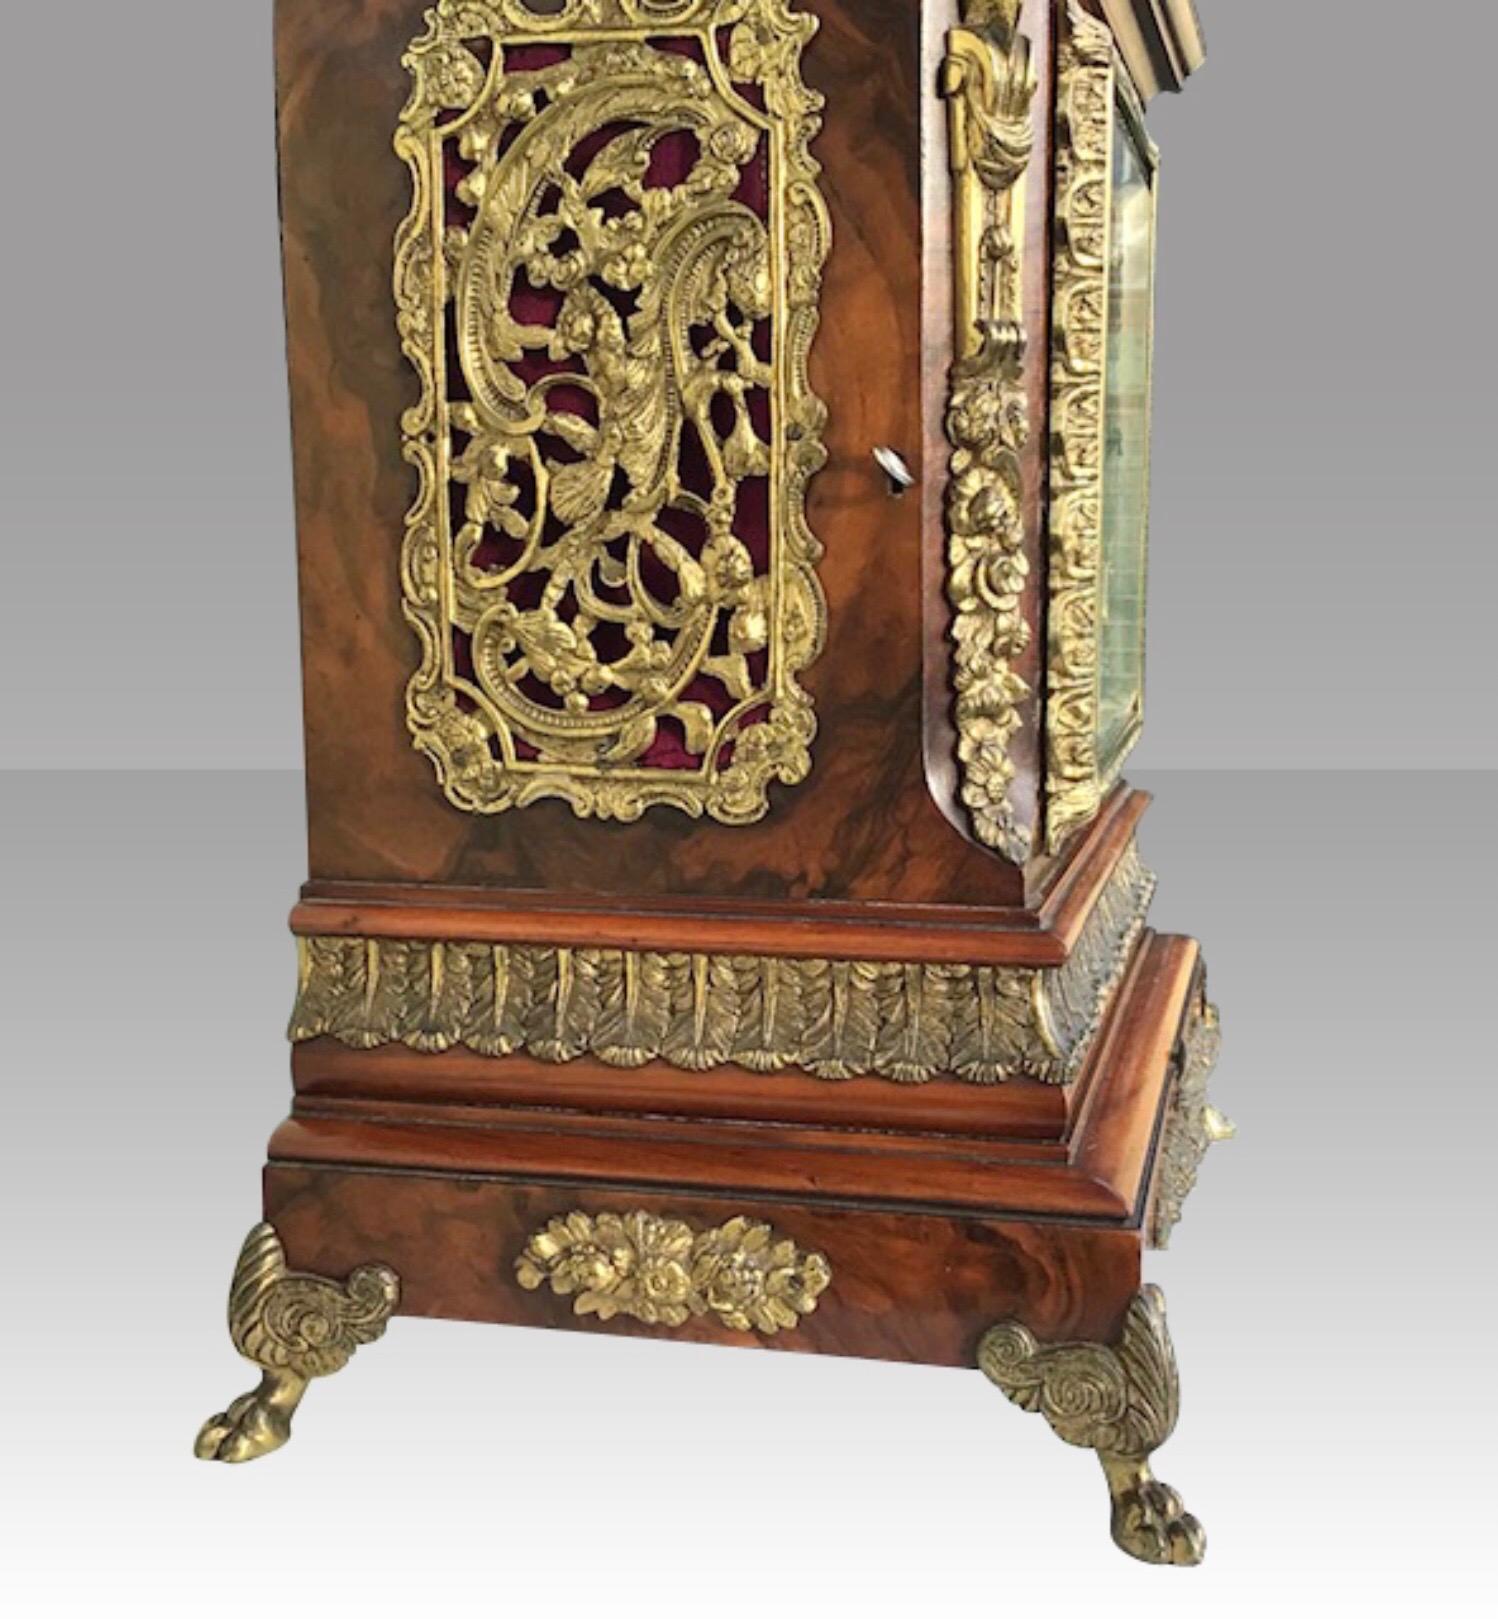 19th Century Large English Triple Fusee Bracket Boardroom Musical Clock For Sale